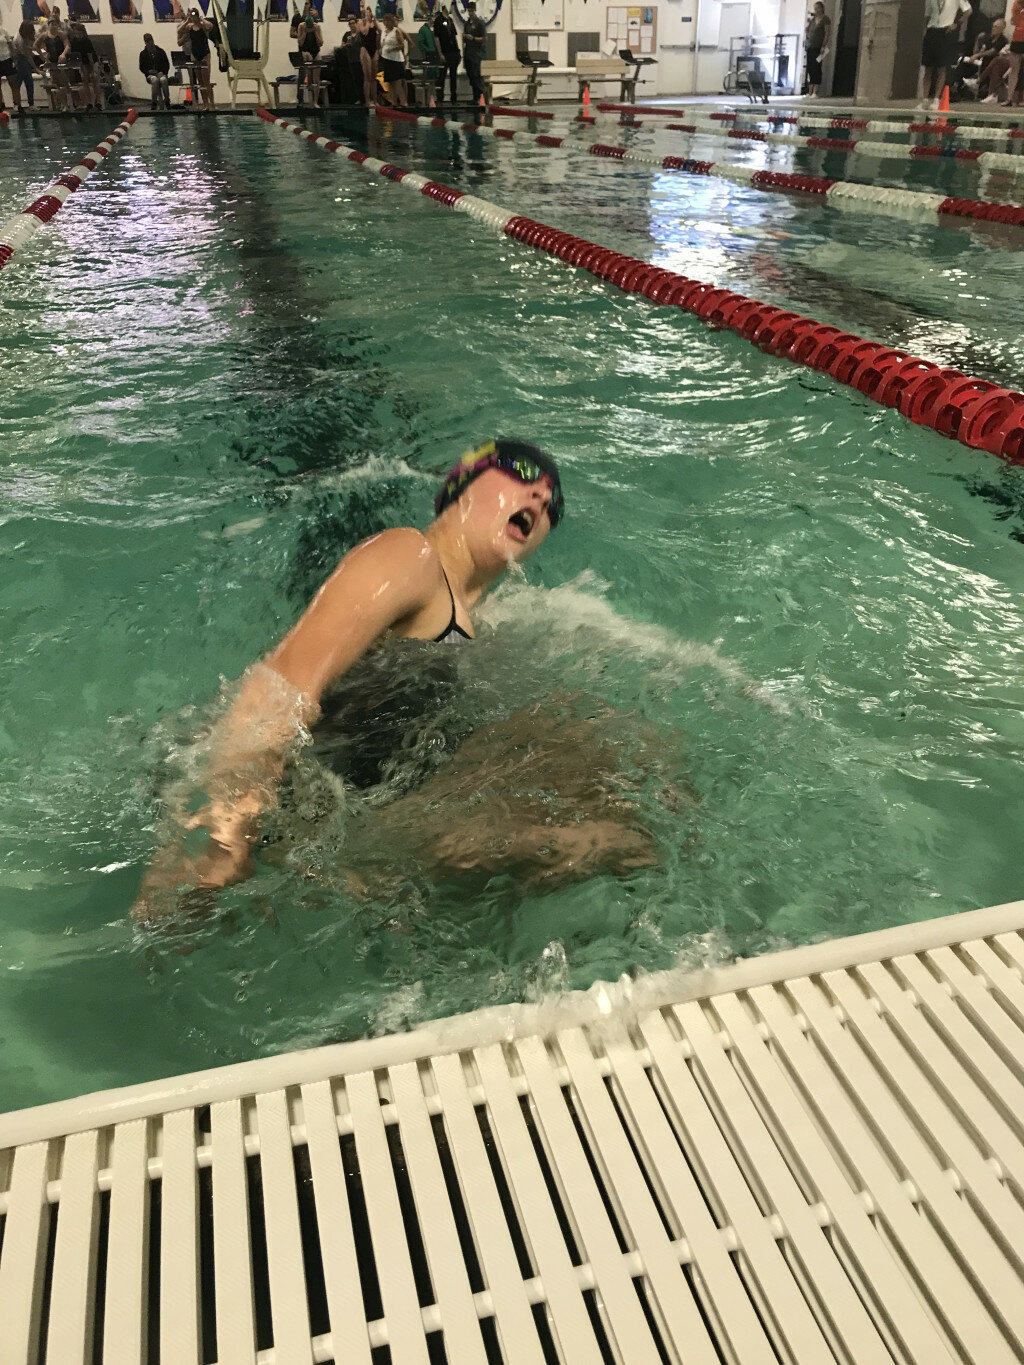 Ambr Seemann photo
Sophomore KaLee Bohnet makes a turn in the 200-freestyle relay at the Adam Denton Memorial in Jackson. She and her teammates finished fifth in the finals on Saturday.